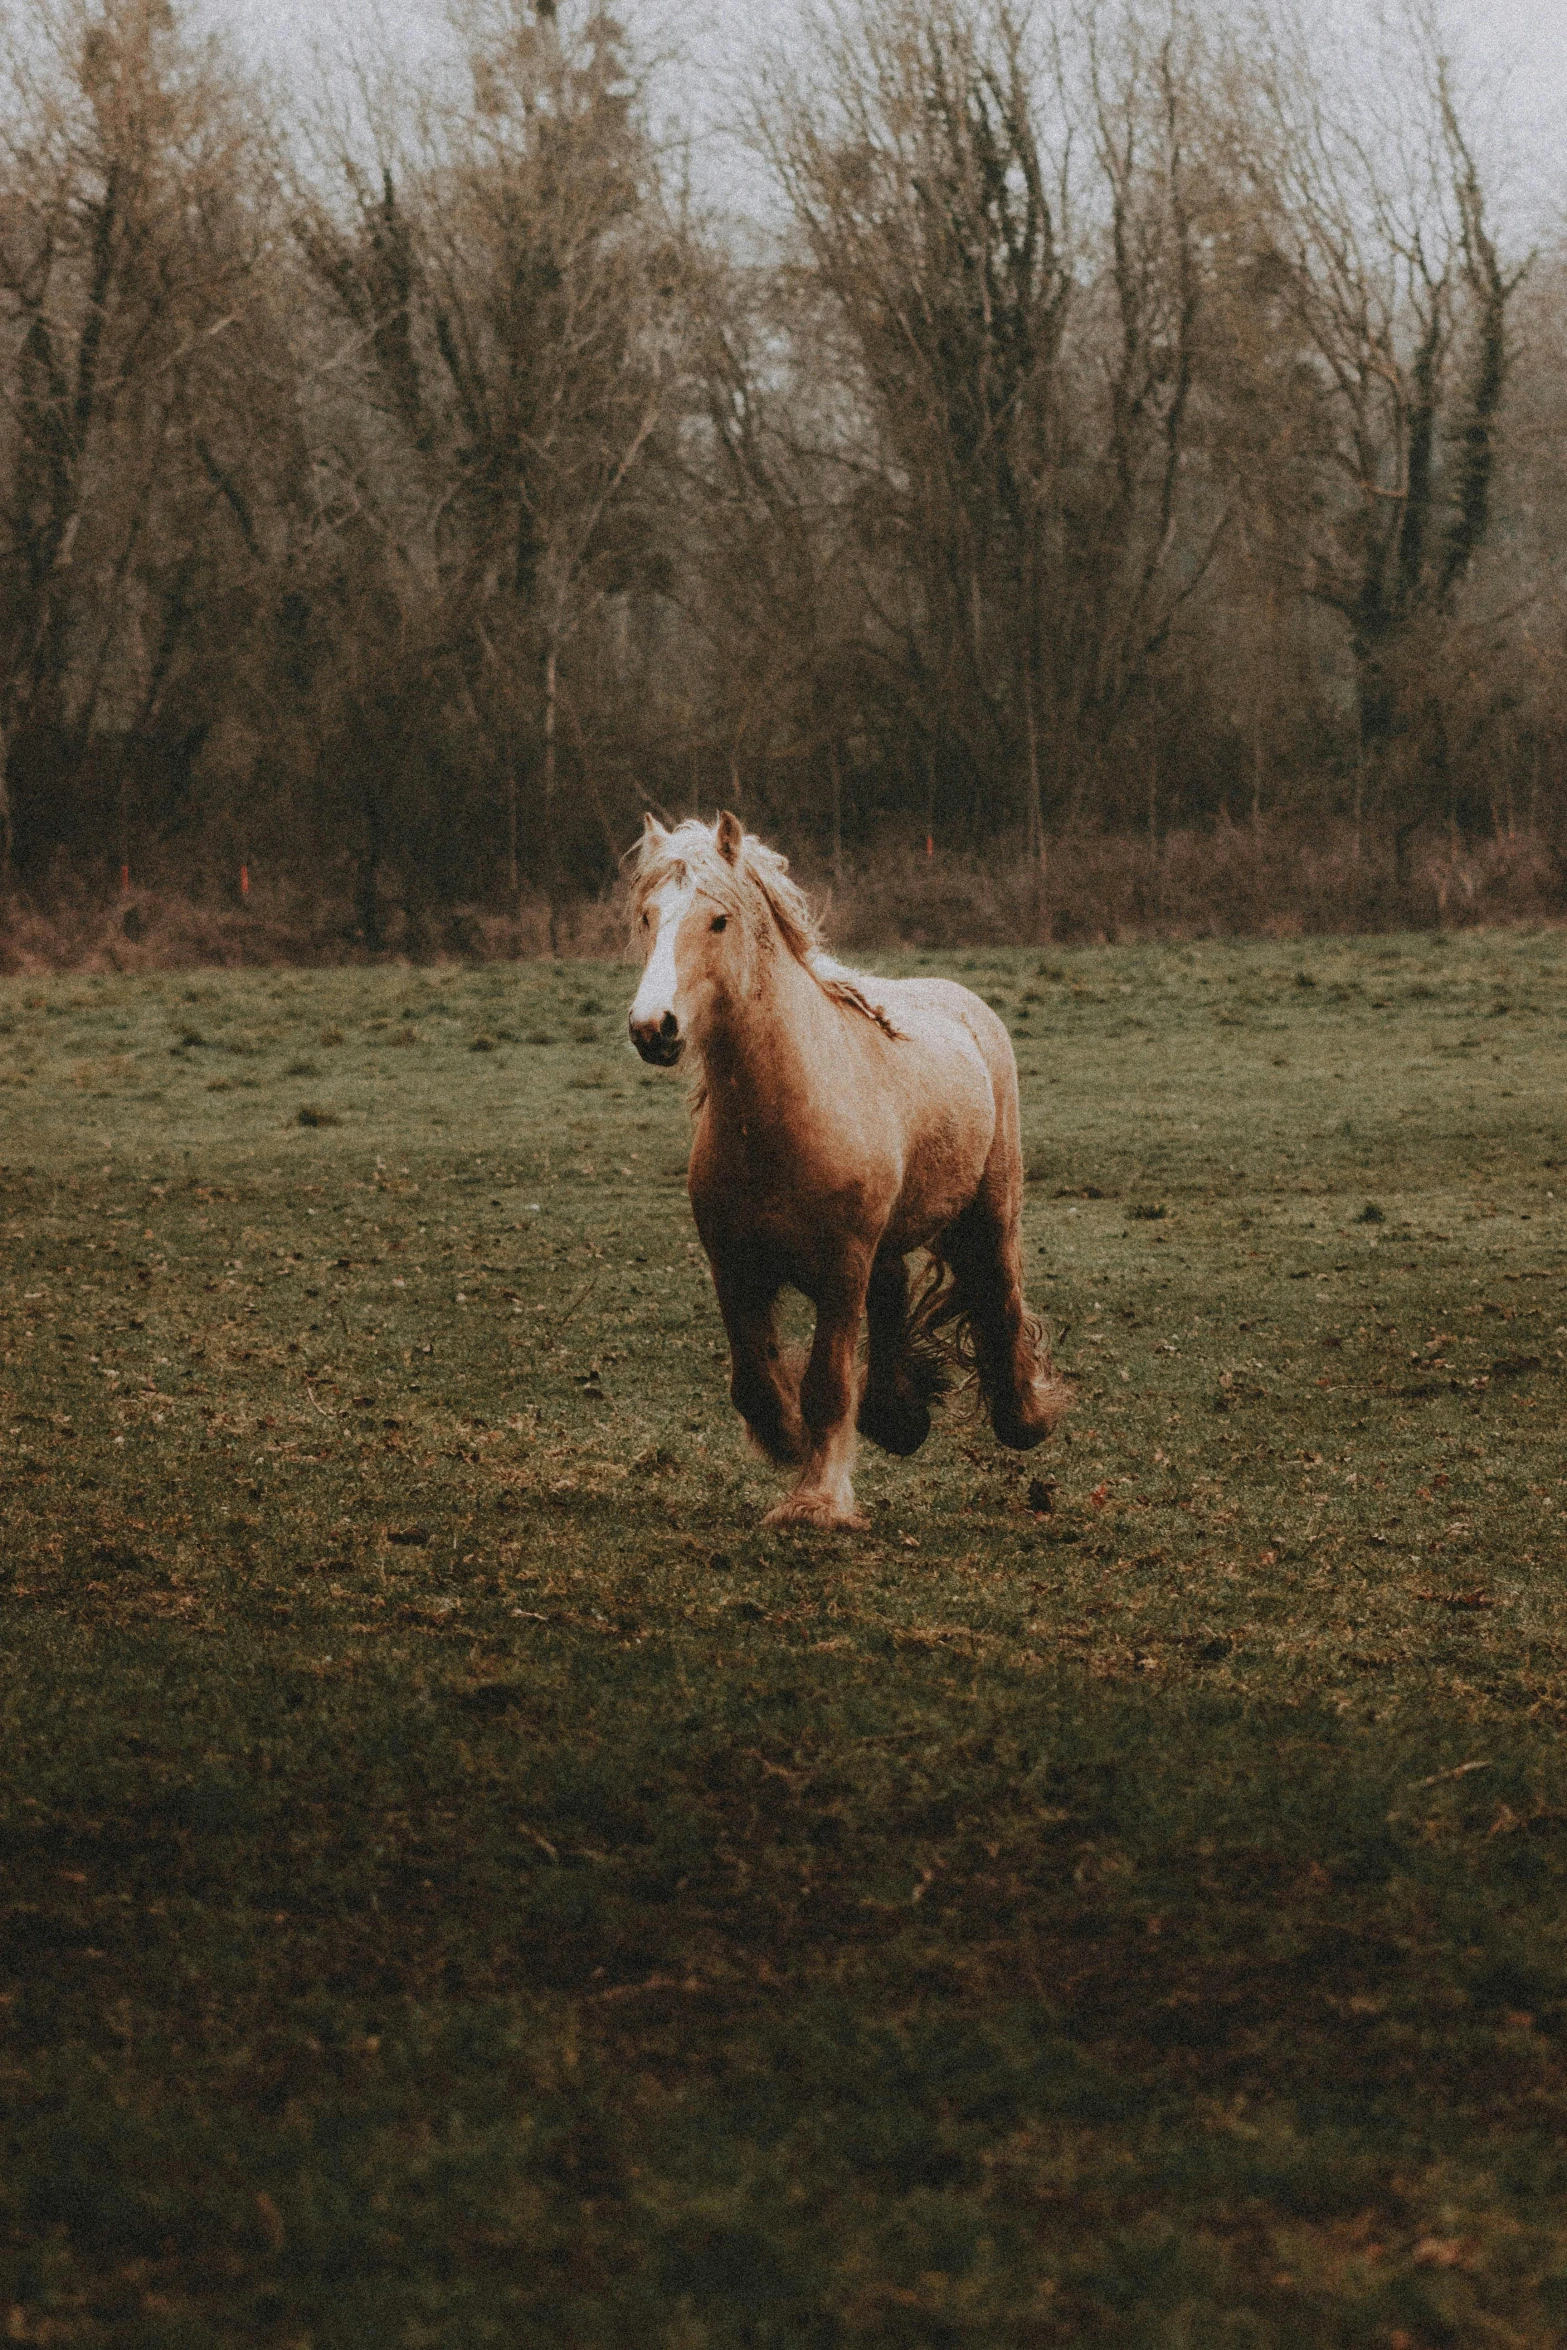 a single horse is out in the field